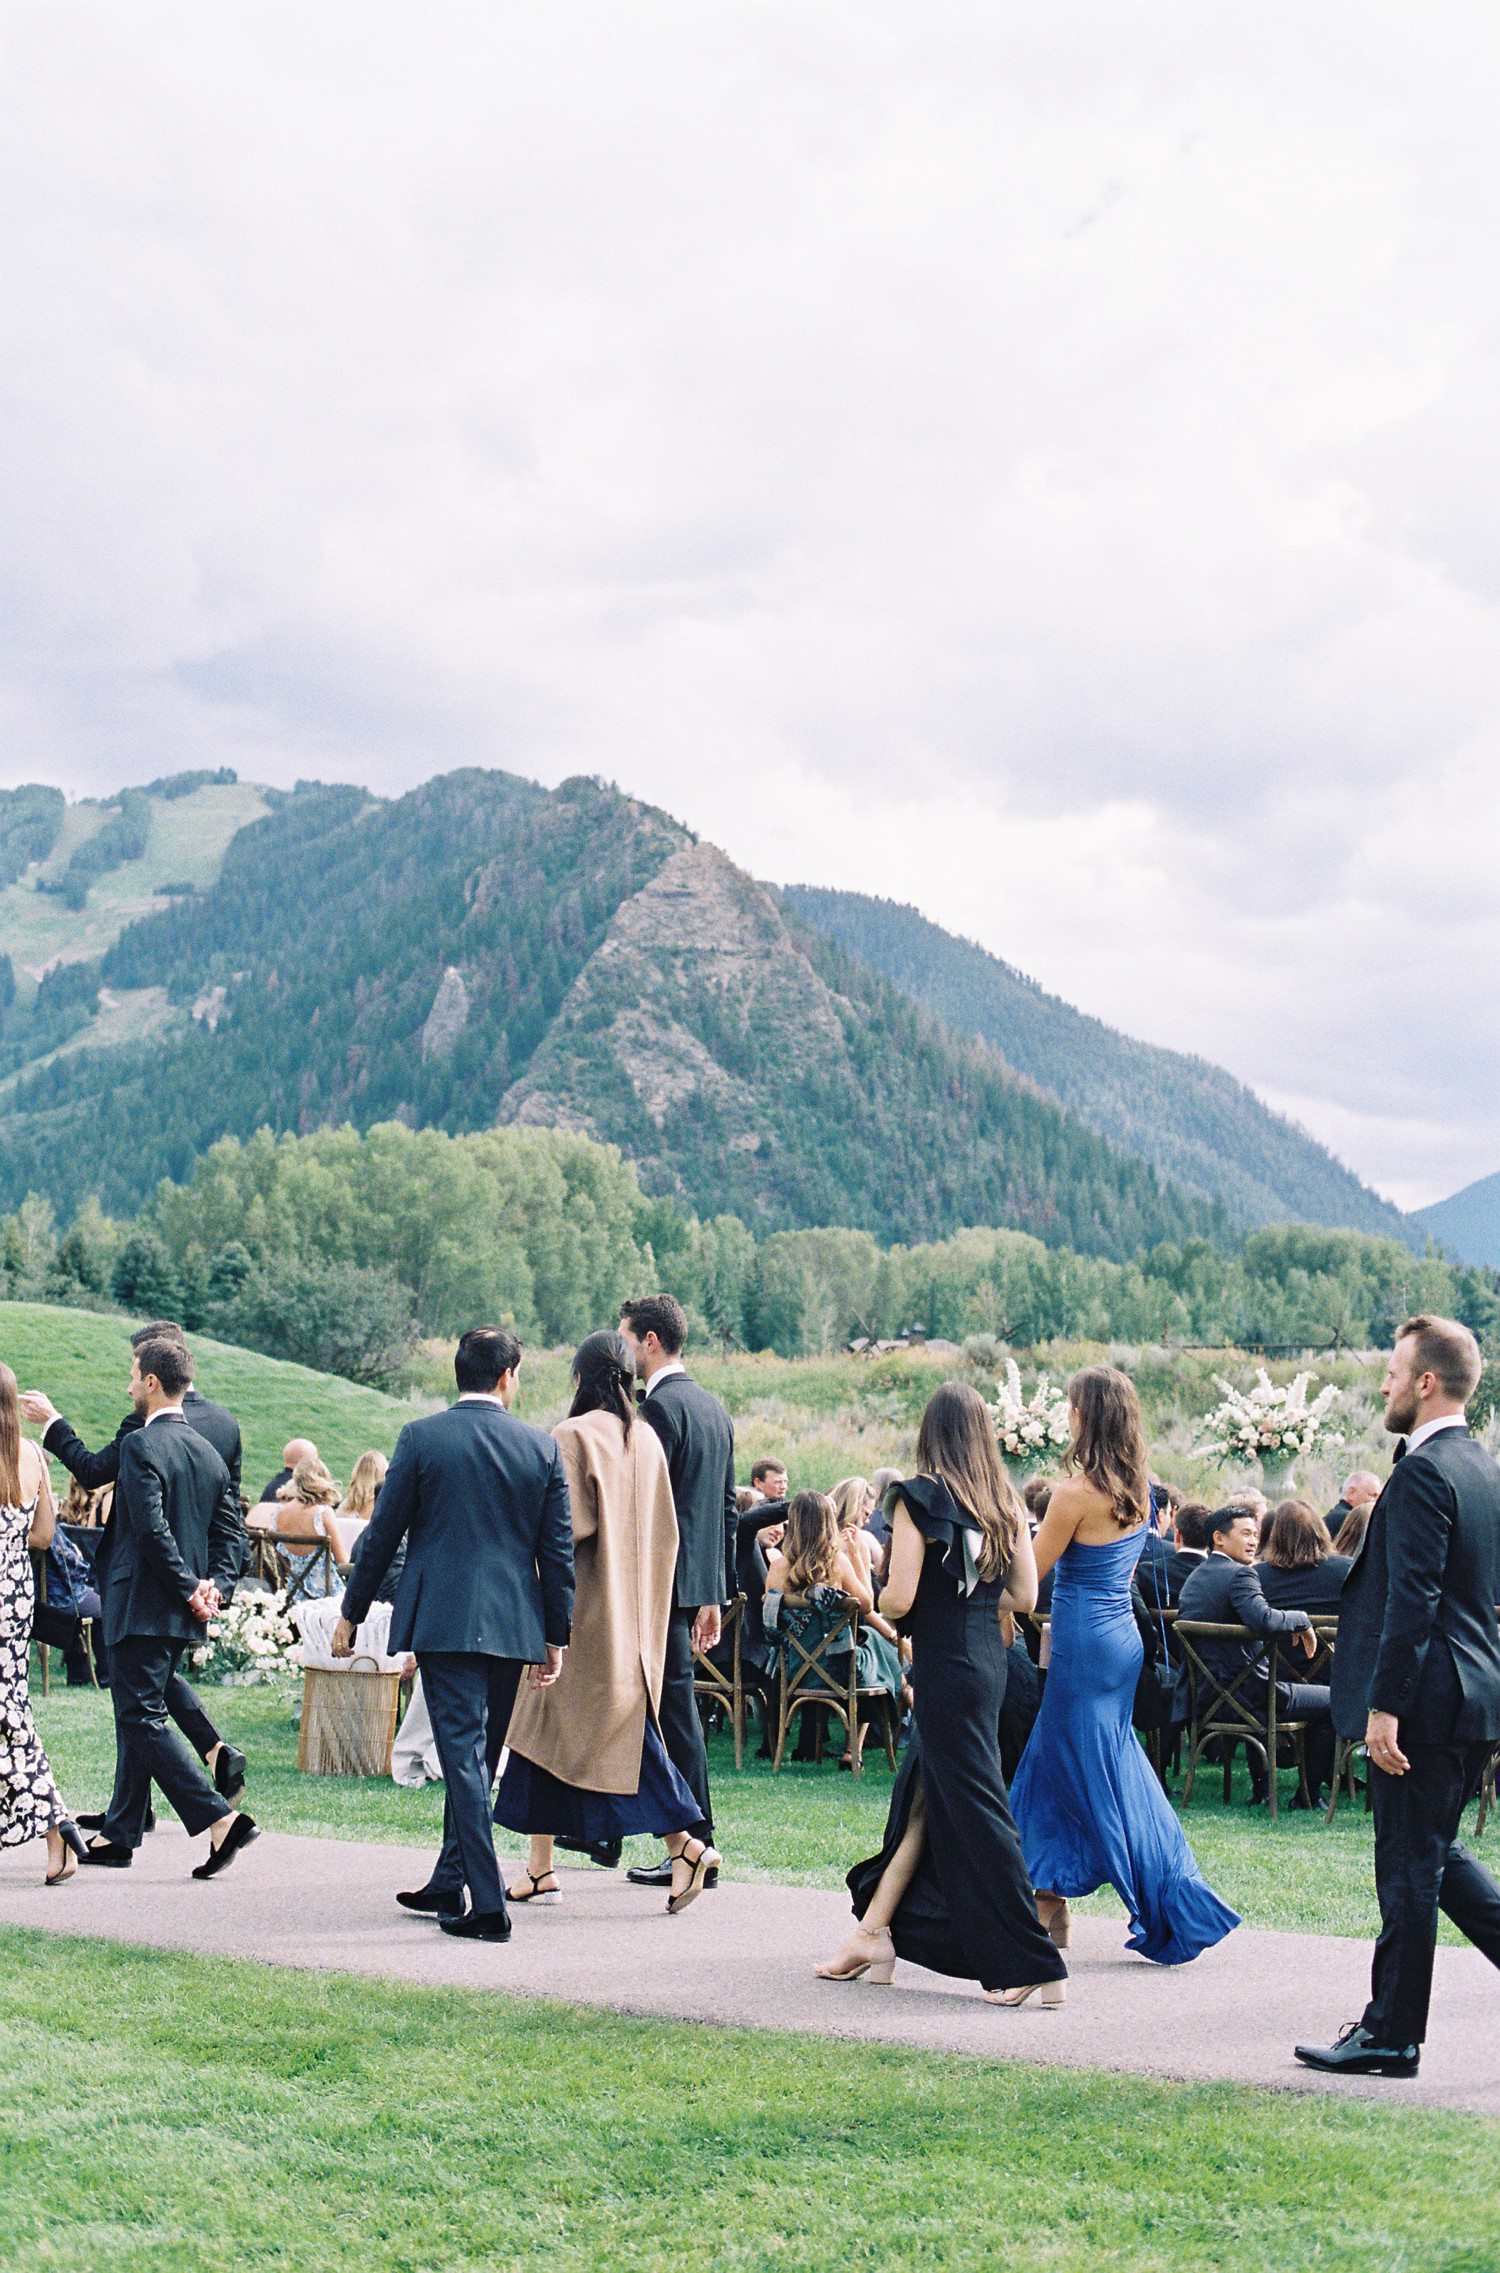 Guests arriving to wedding ceremony at Aspen Meadows Resort. 